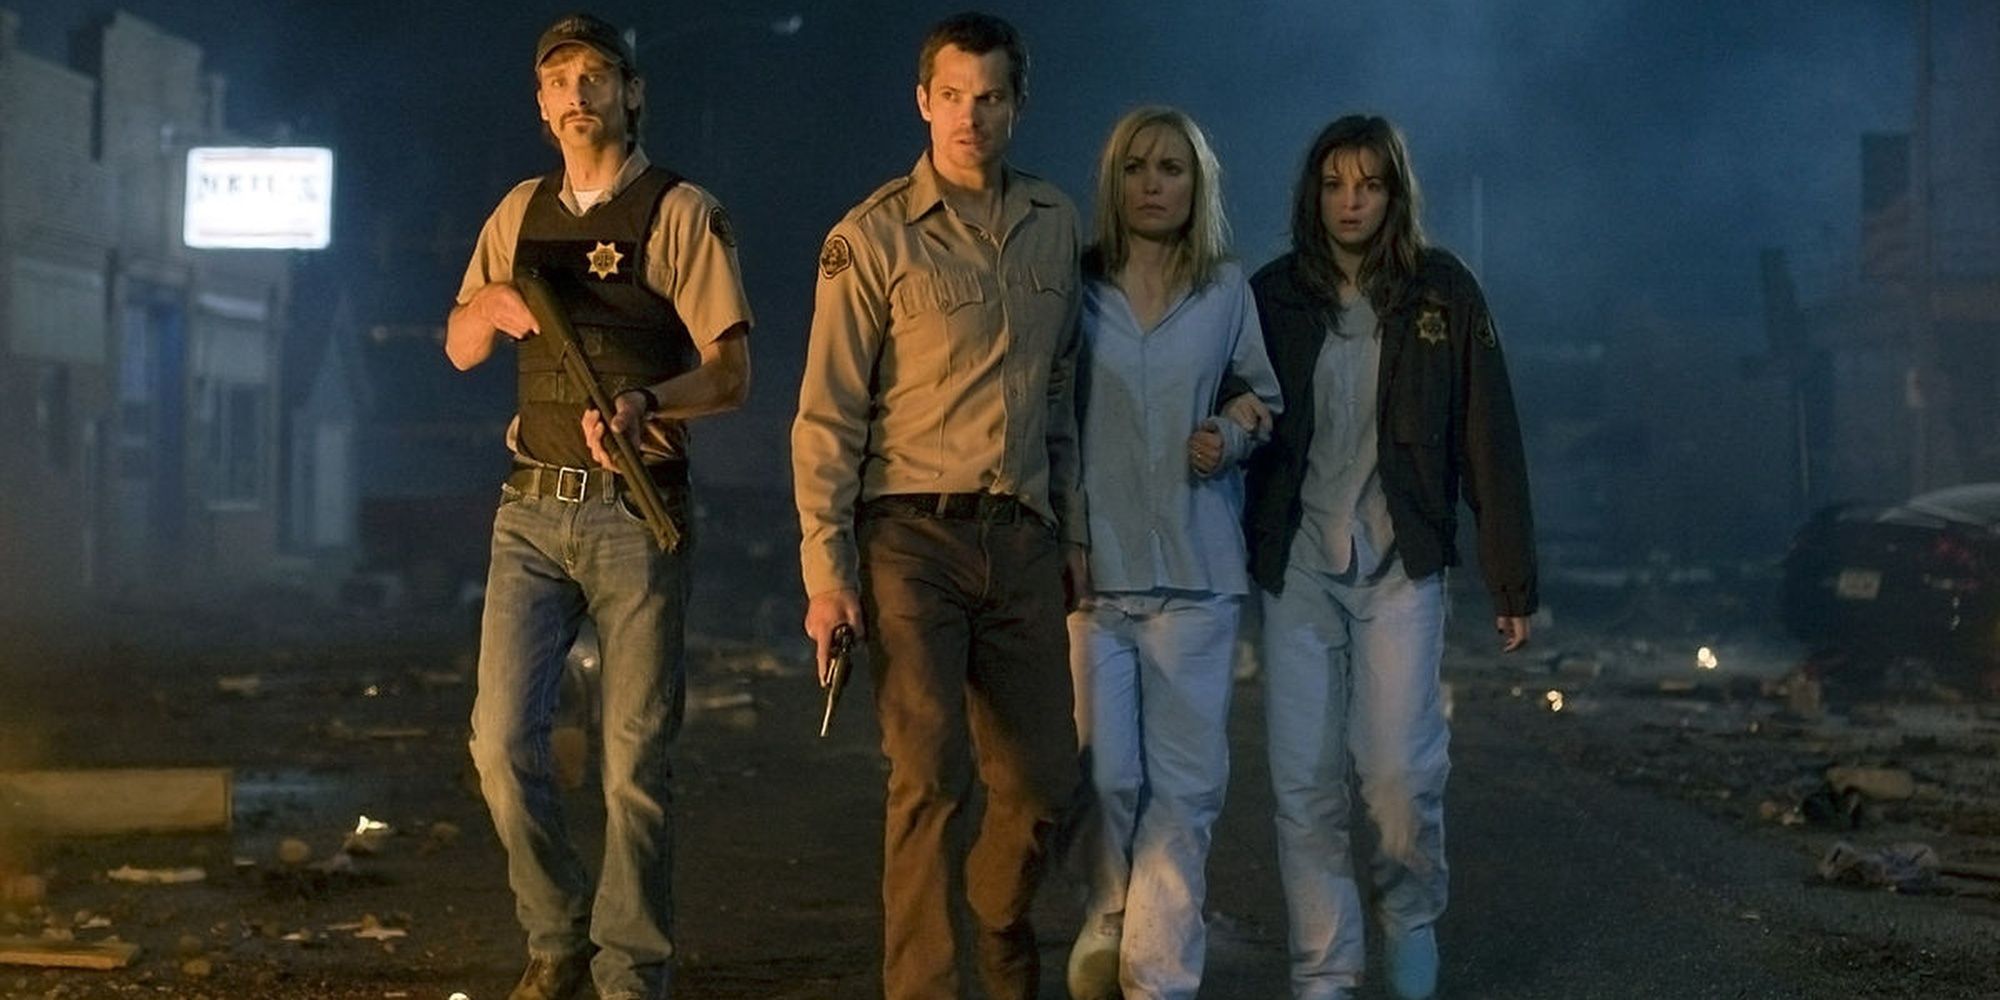 The main cast of The Crazies walking through an abandoned street